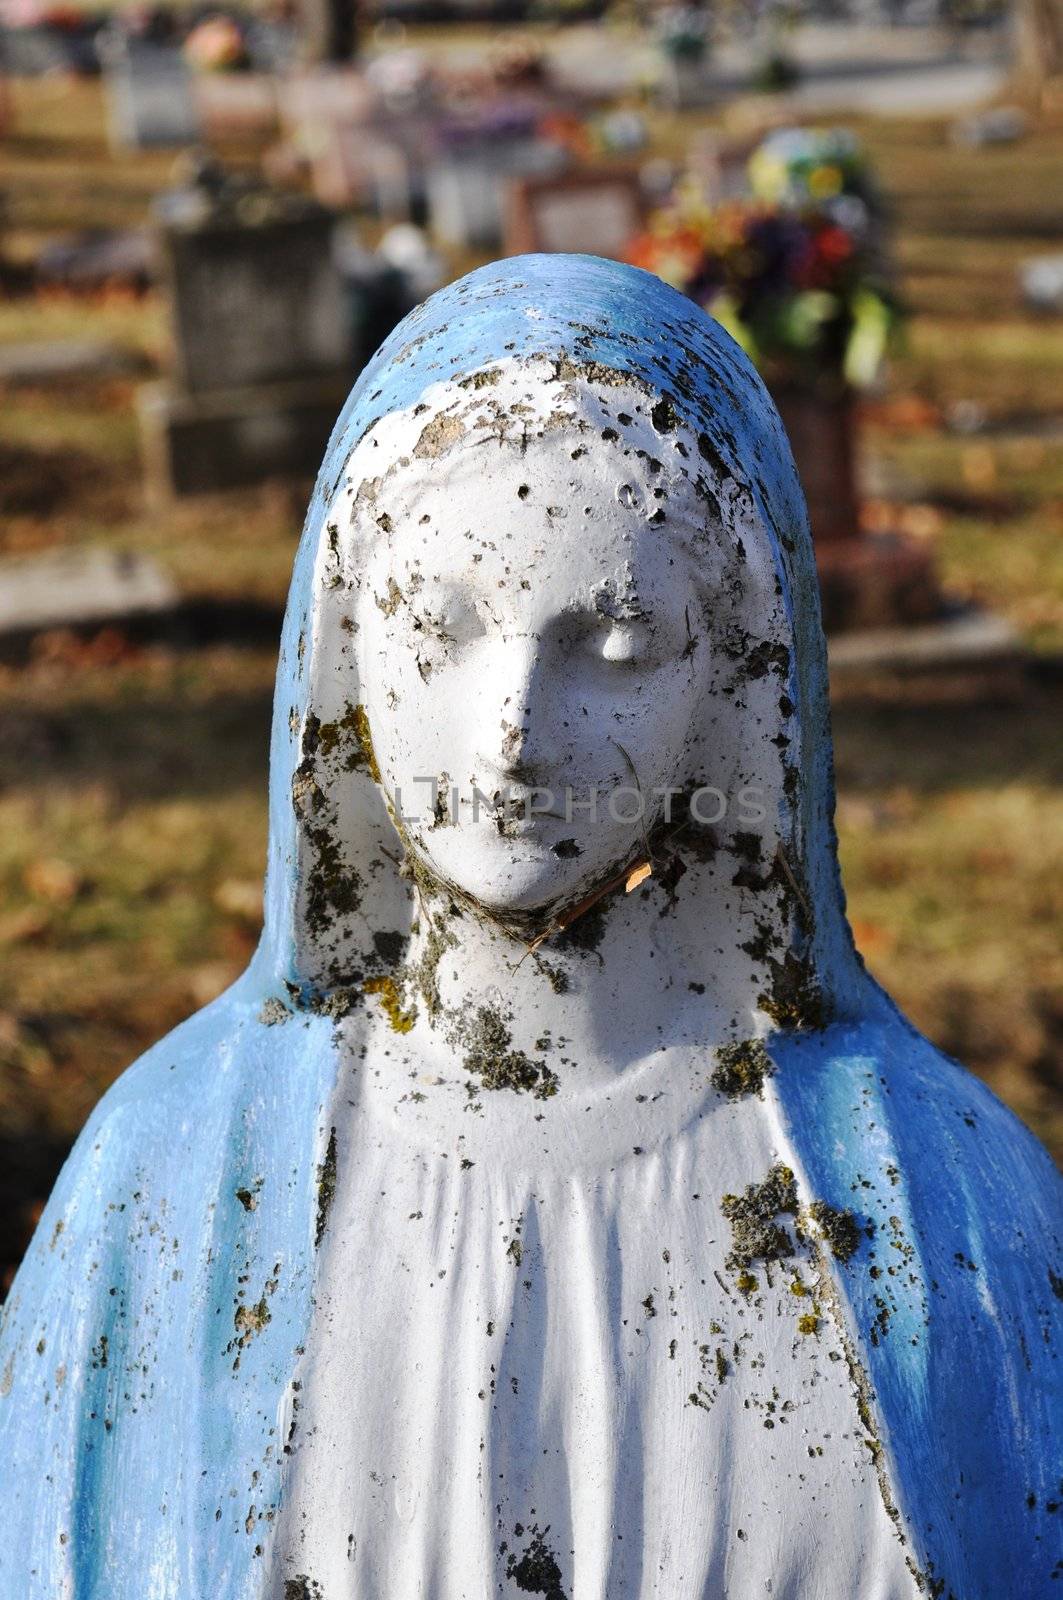 Gravesite - Mary statue - close-up by RefocusPhoto